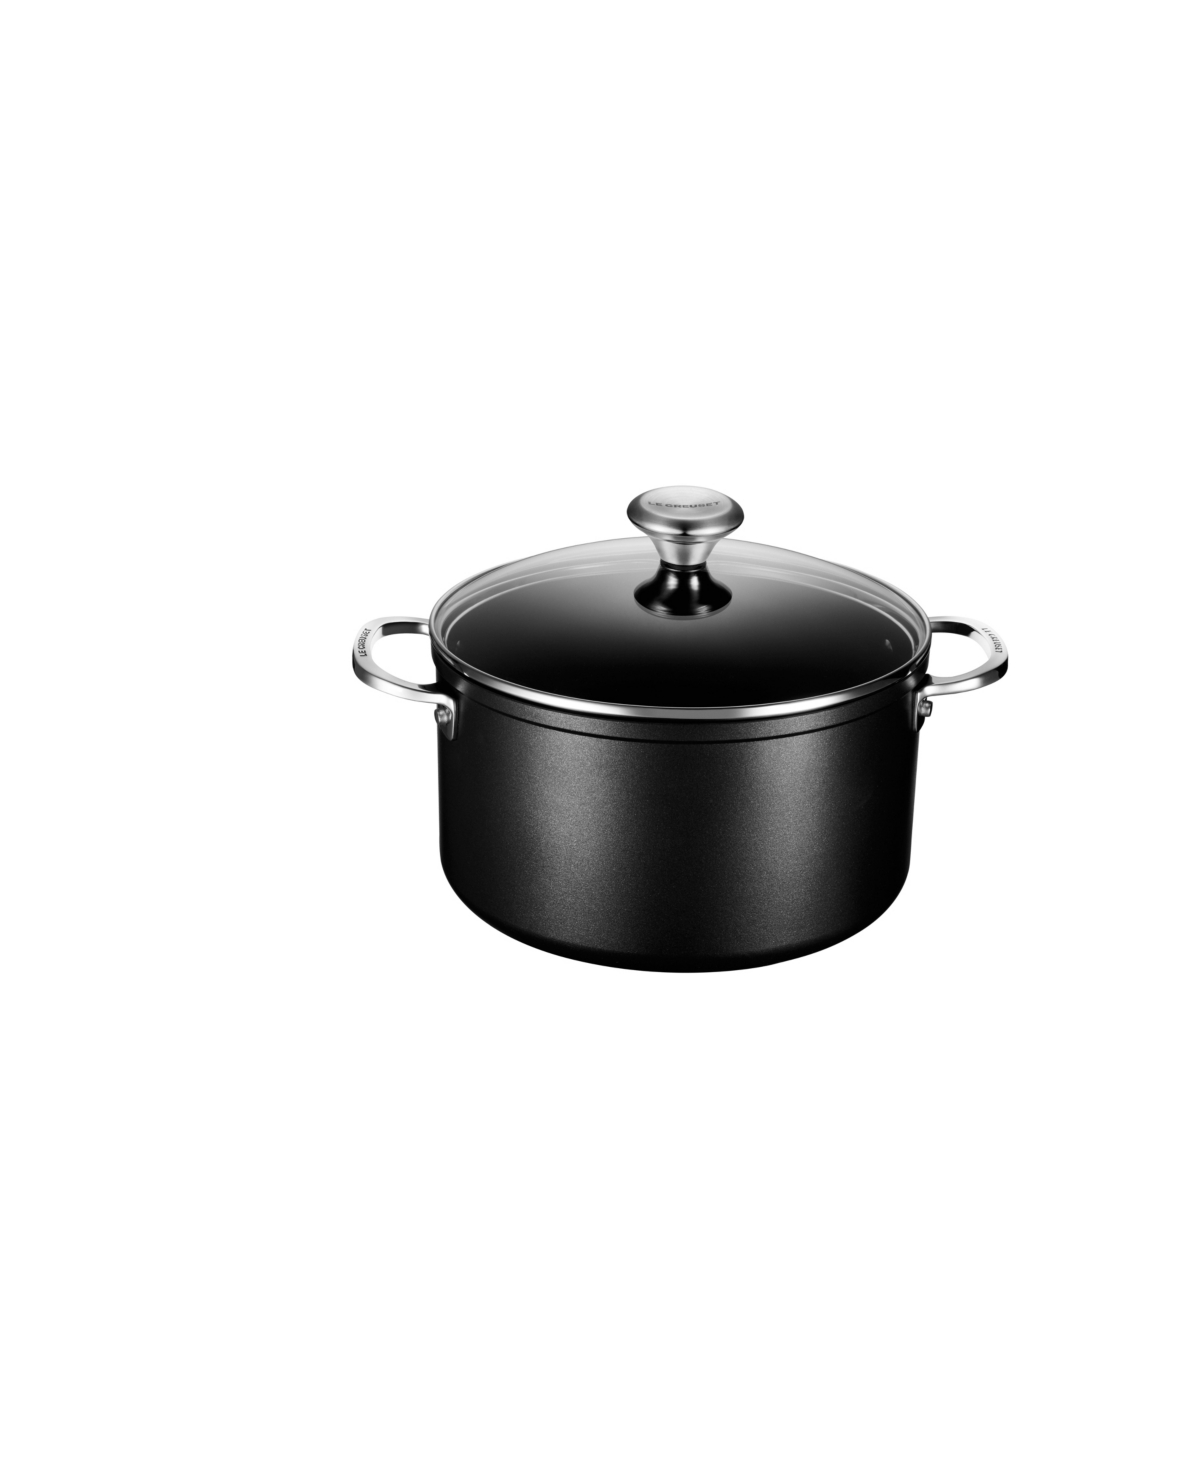 Le Creuset 6.3 Quart Toughened Nonstick Stockpot With Lid In Black